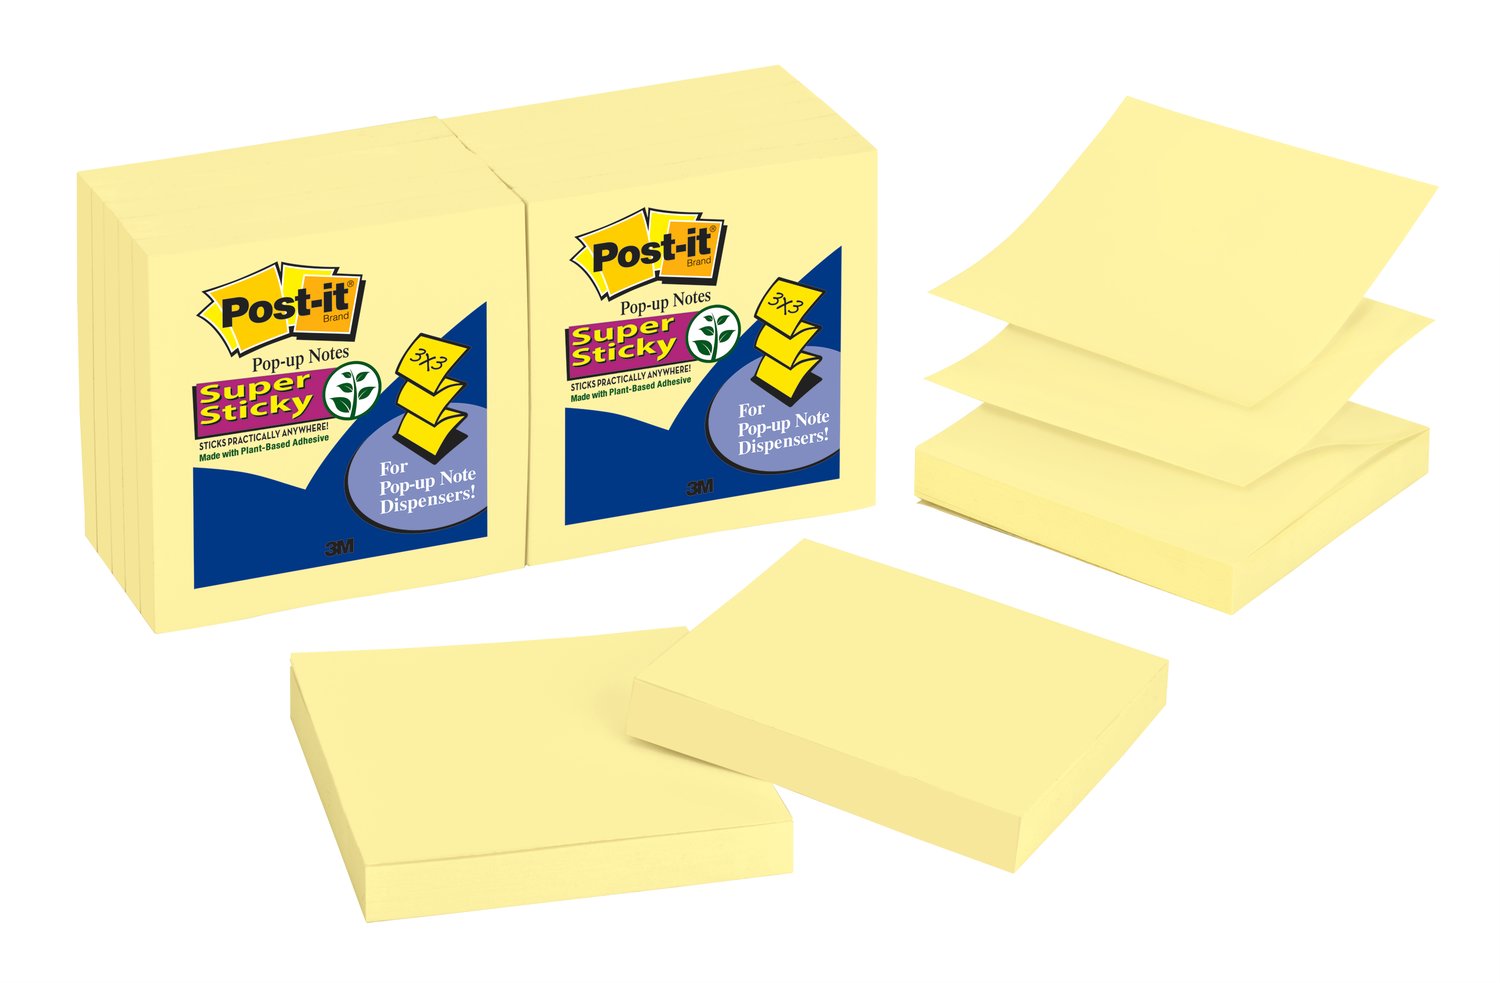 7000052632 - Post-it Super Sticky Dispenser Pop-up Notes R330-12SSCY, 3 in x 3, Canary Yellow, 90 sht/pad, 12 pad/pk